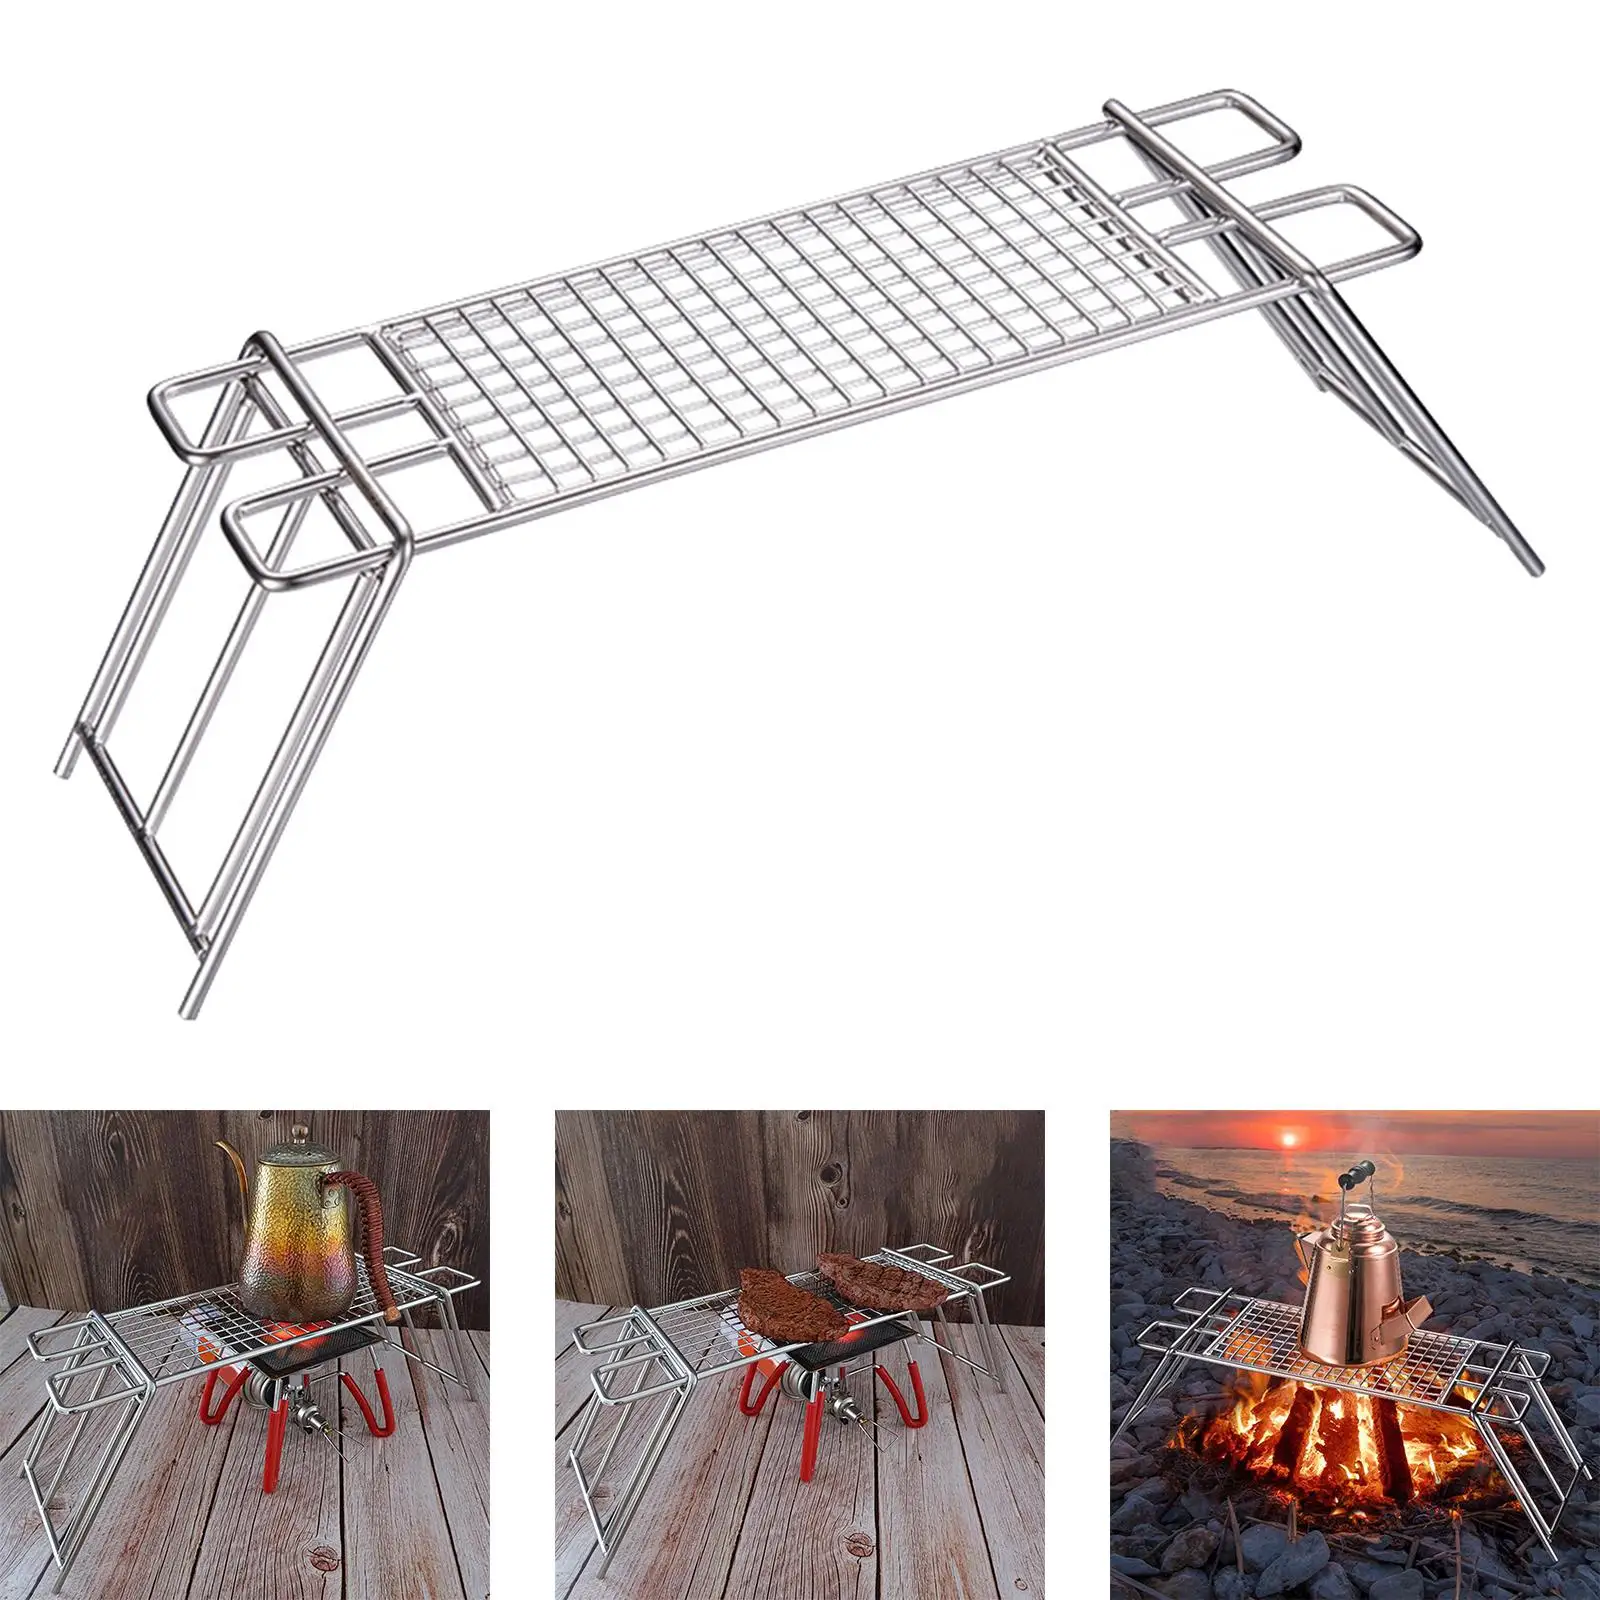 Stainless Steel Barbecue Grill Pot Rack Foldable Leg Design  Durable  Mesh Rack for Cooking Traveling Fishing Camping Hiking